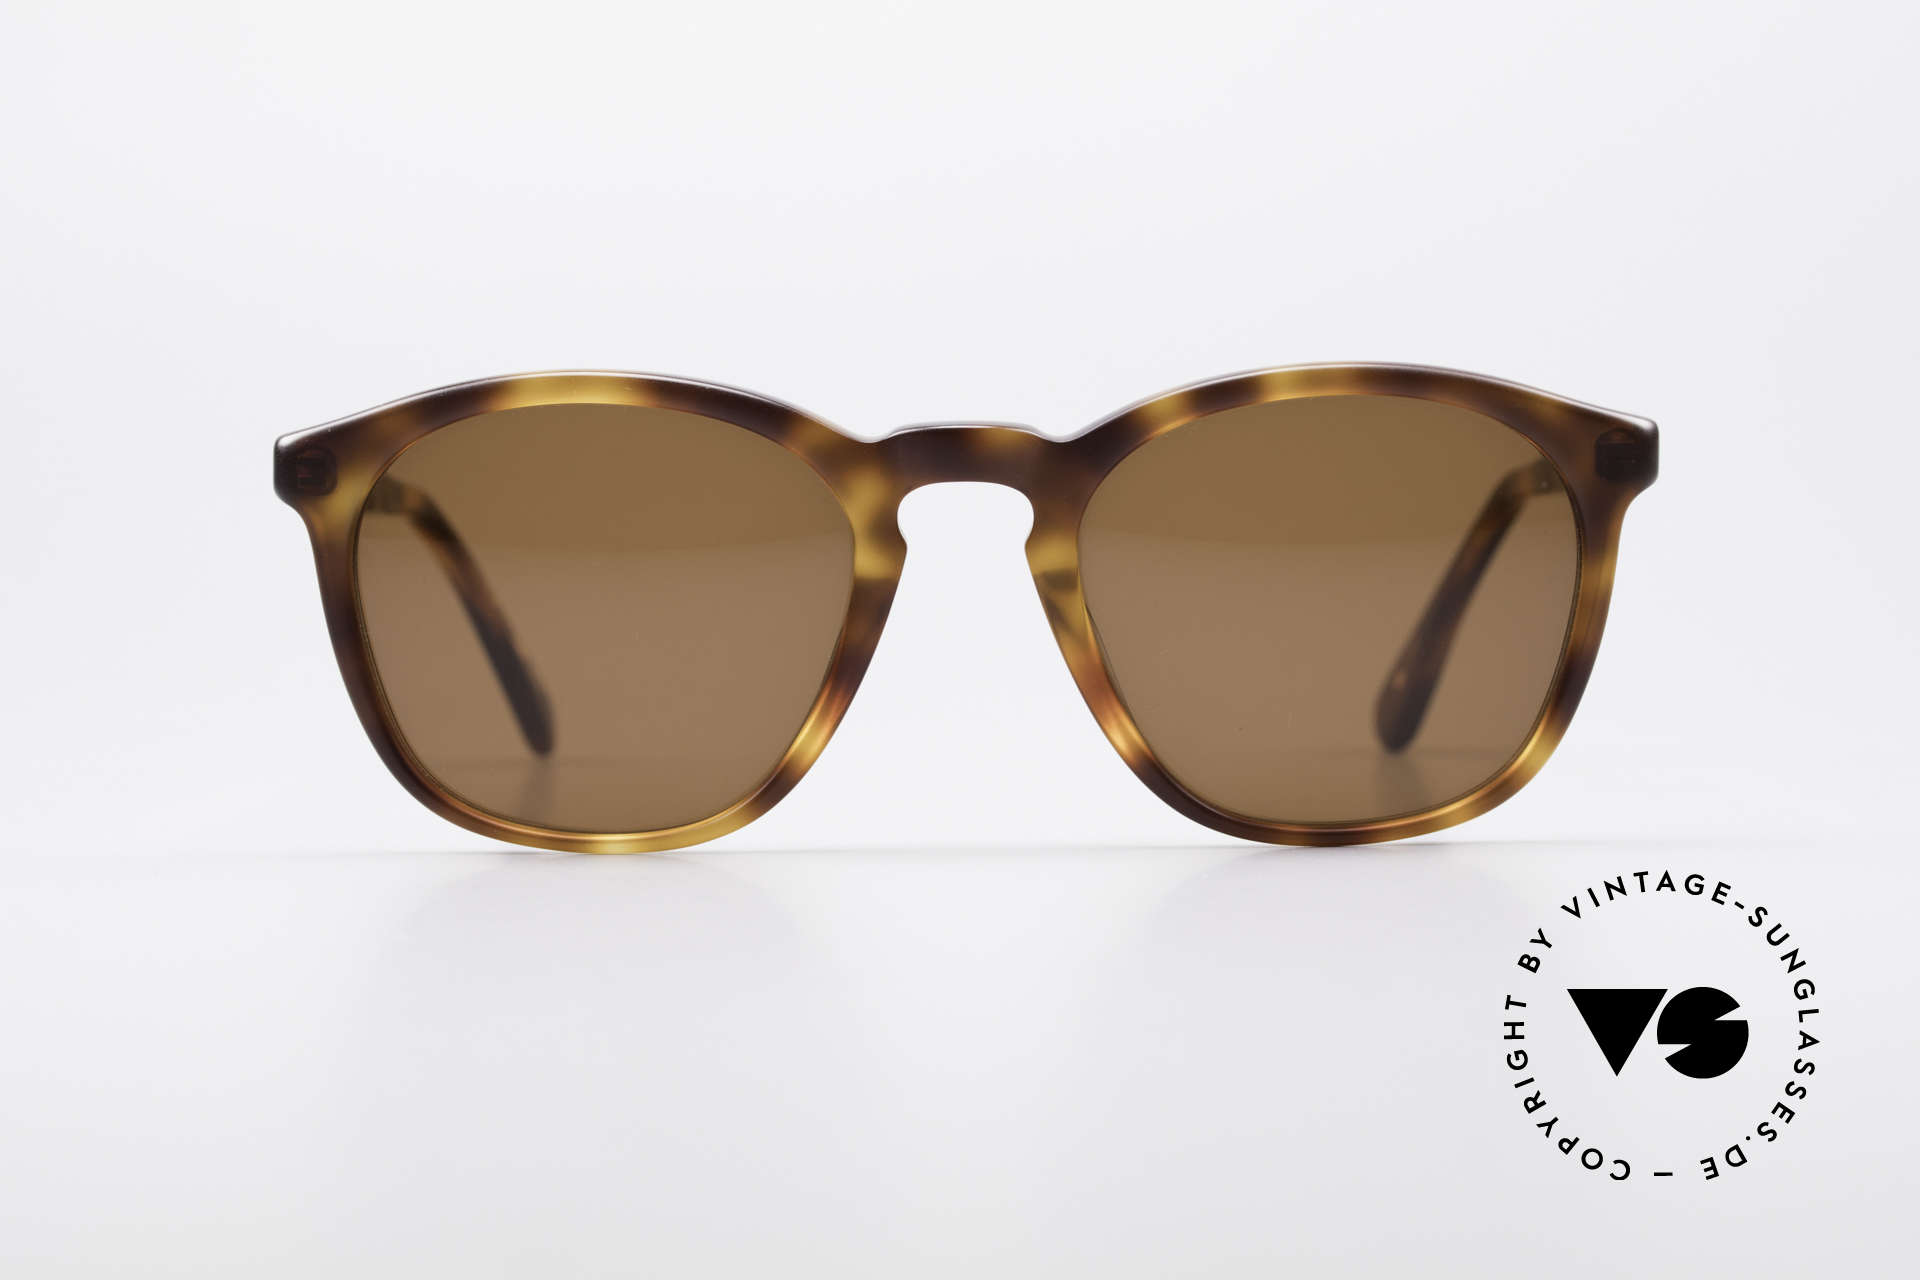 Matsuda 2816 High-End Vintage Sunglasses, outstanding quality by the Japanese Design manufactory, Made for Men